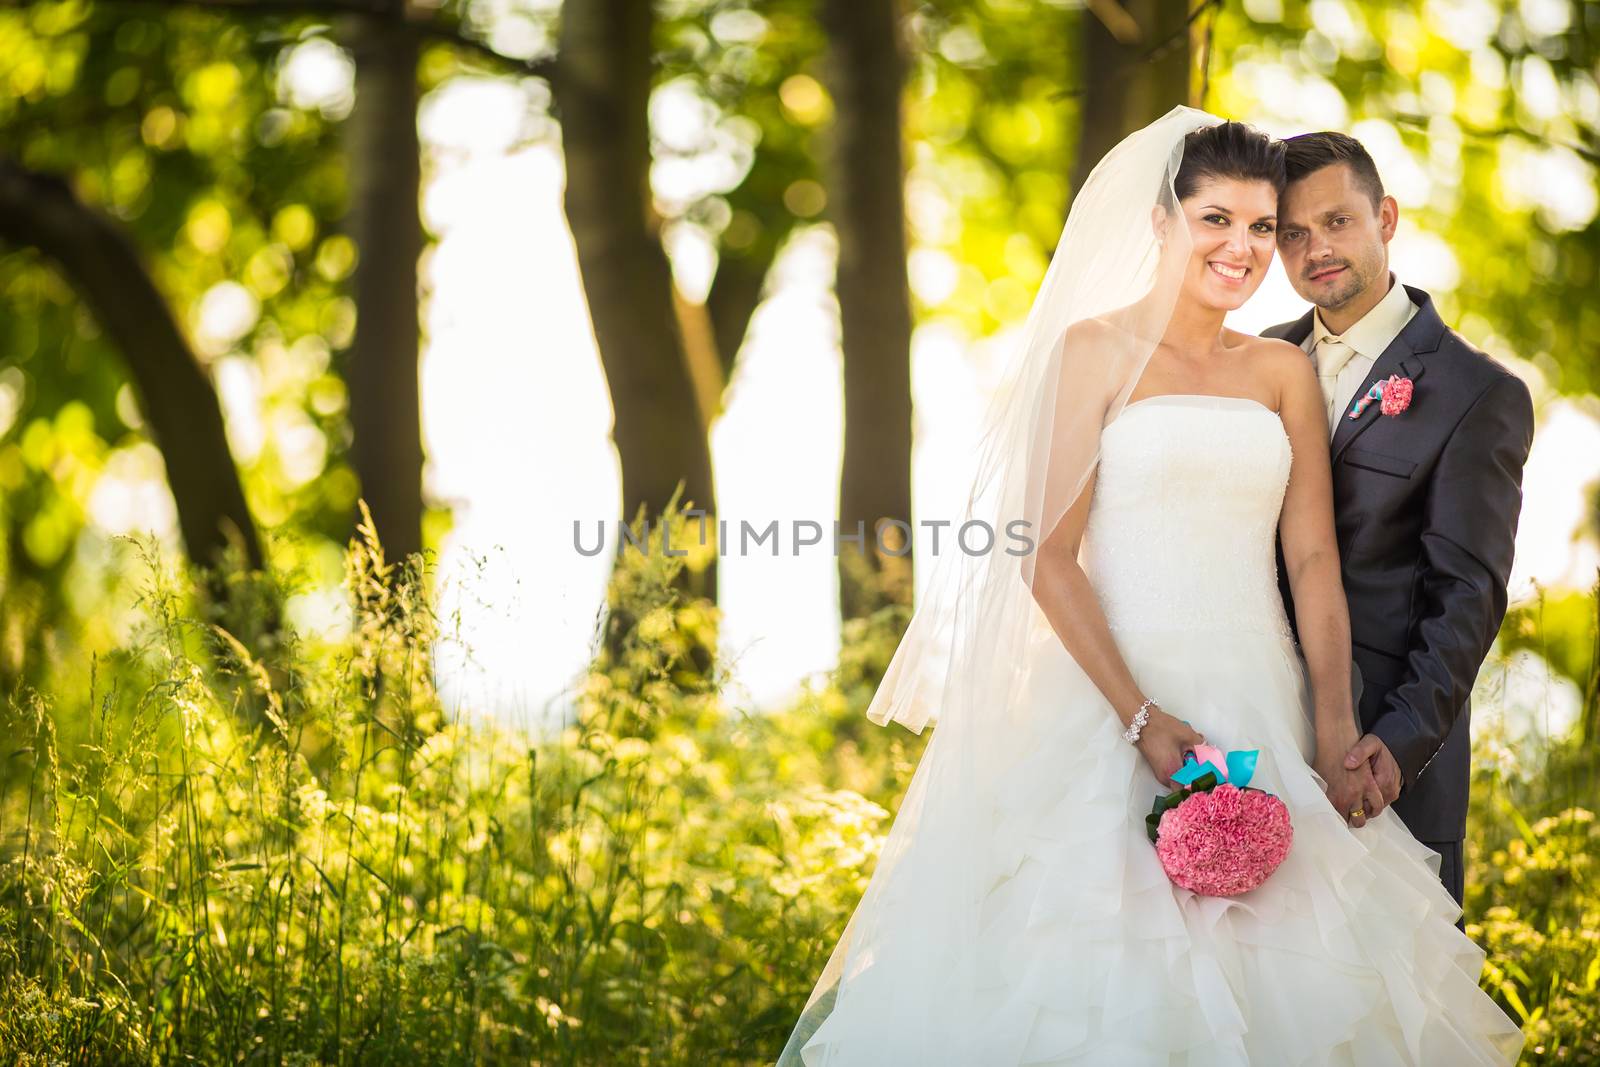 Portrait of a young wedding couple on their wedding day by viktor_cap